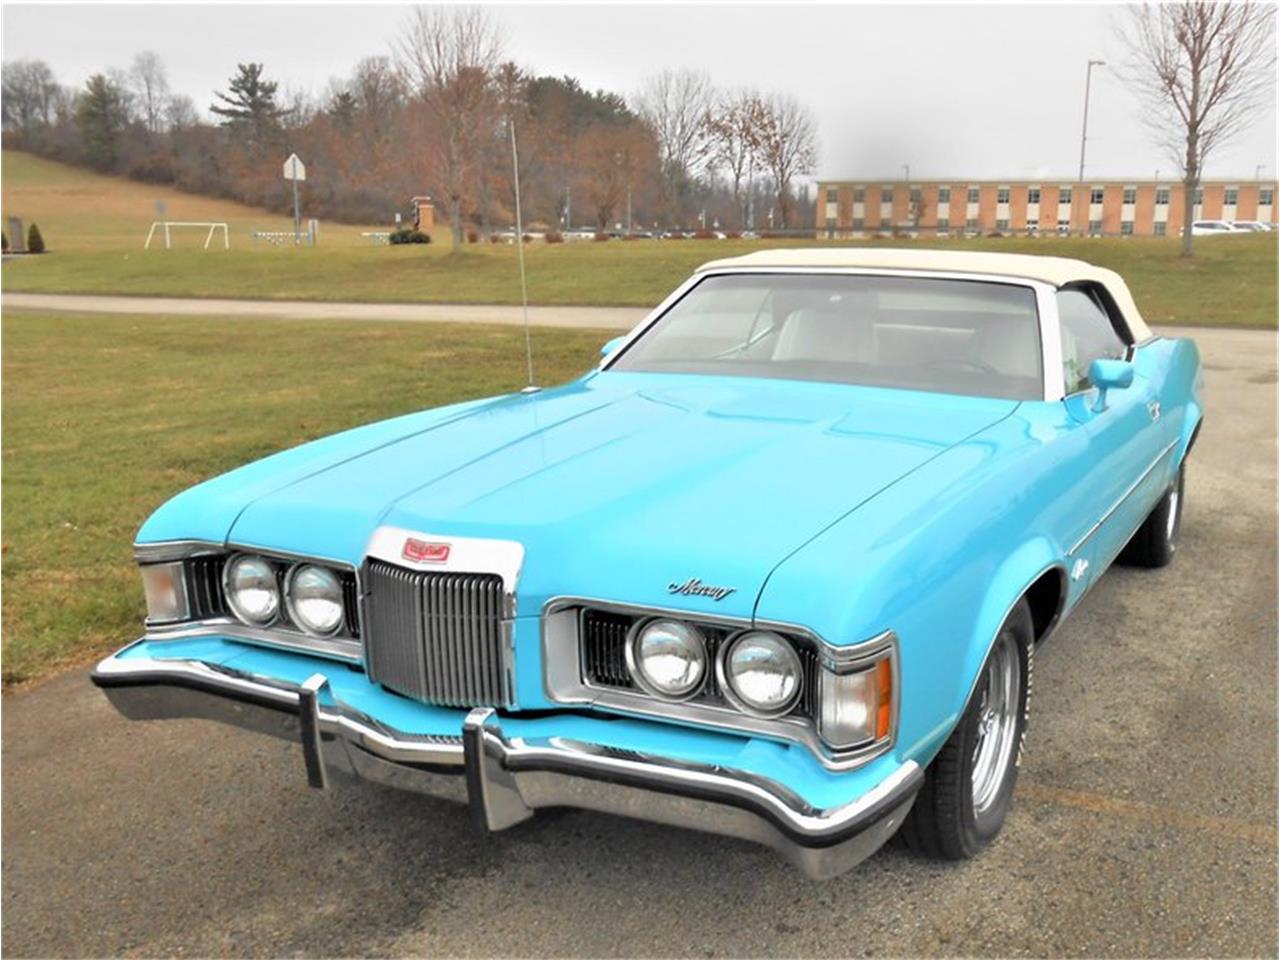 For Sale at Auction: 1973 Mercury Cougar in Greensboro, North Carolina for sale in Greensboro, NC